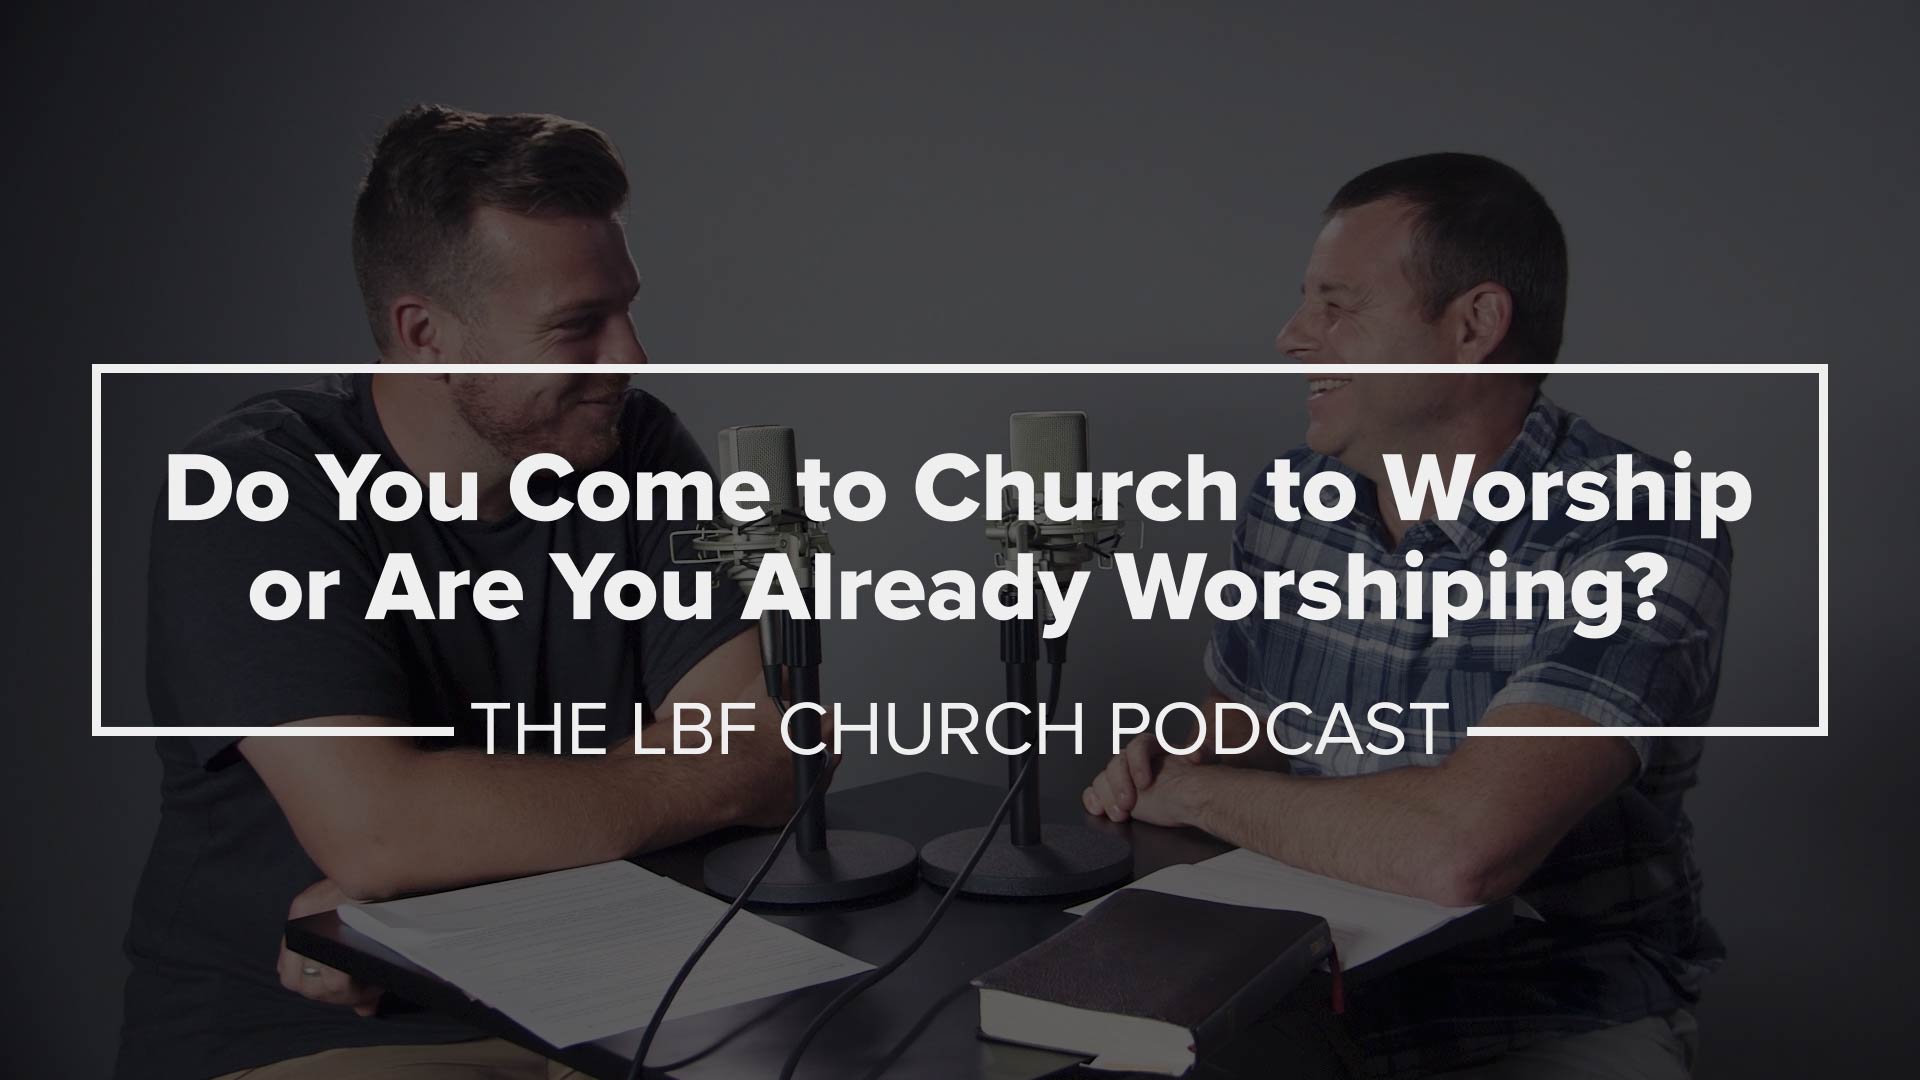 Do You Come to Church to Worship or Are You Already Worshiping?